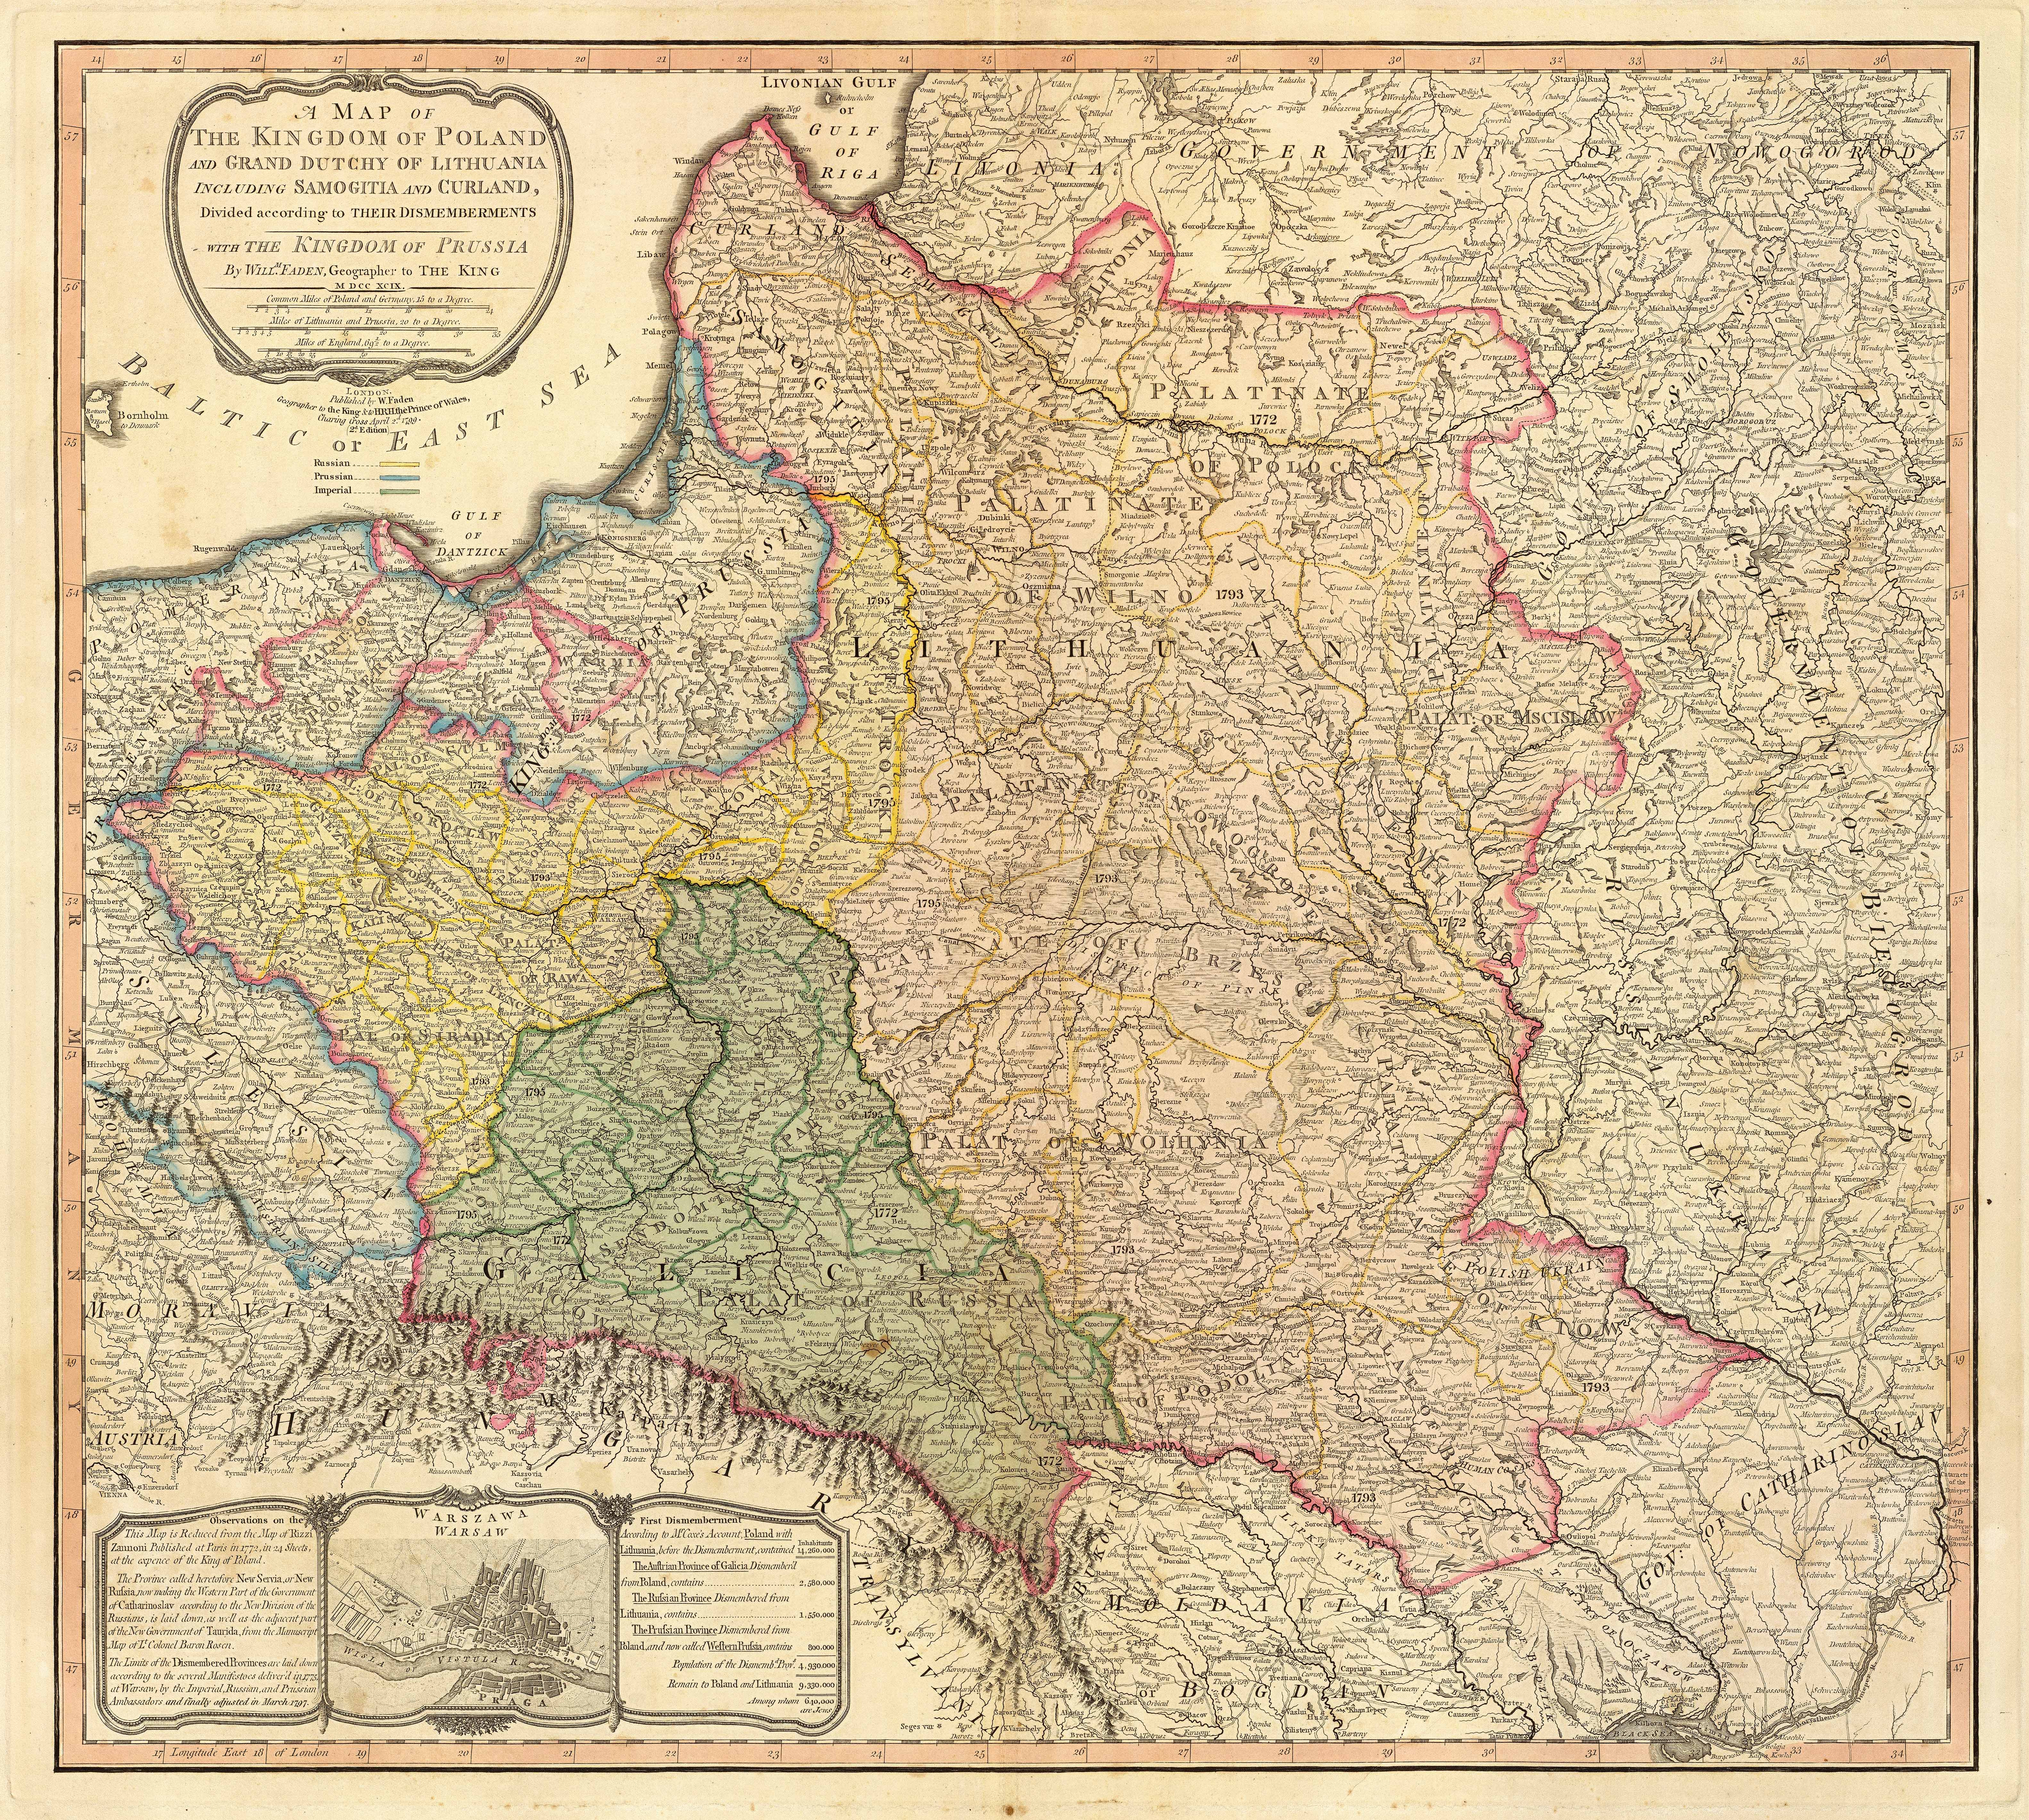 Mapy Polski z róż... - Map_of_the_partition_of_the_Kingdom_of_Poland_and_the_Grand_Duchy_of_Lithuania_from_1799.jpg